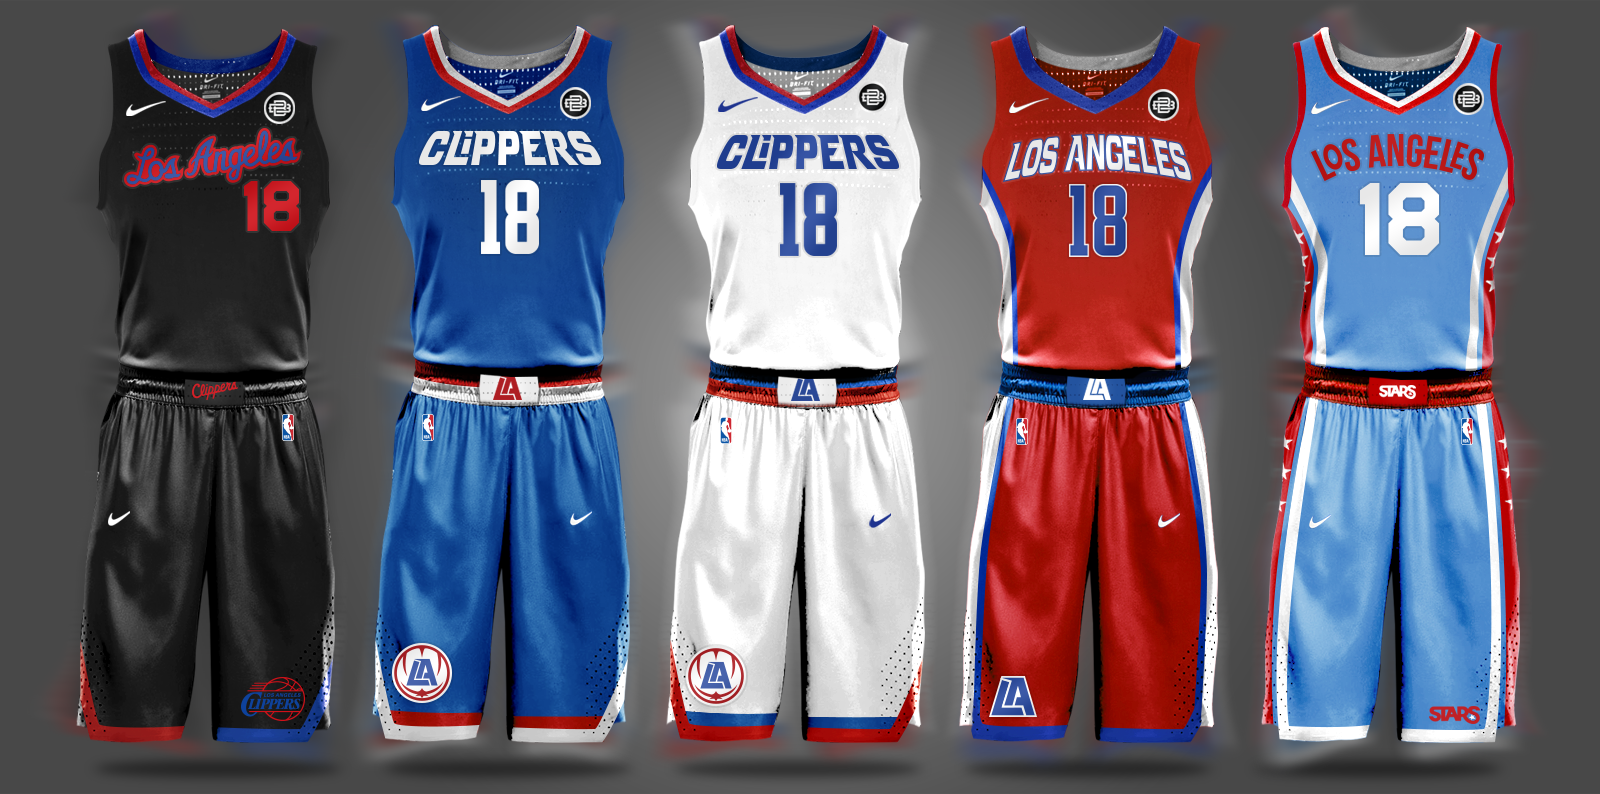 clippers alternate jersey 2019